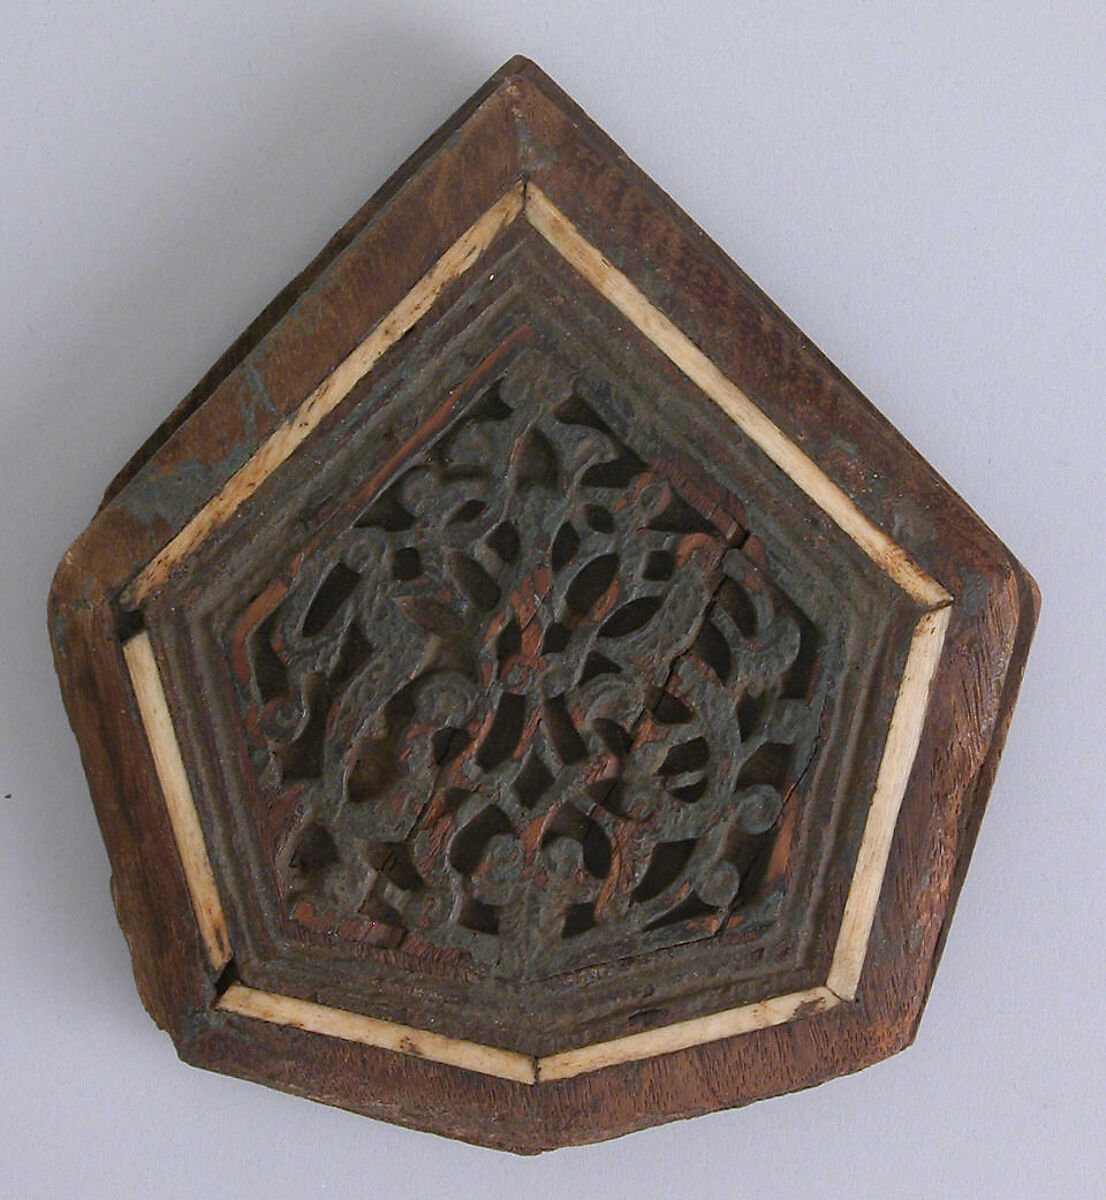 Panel, Wood; carved, inlaid with ivory or bone 